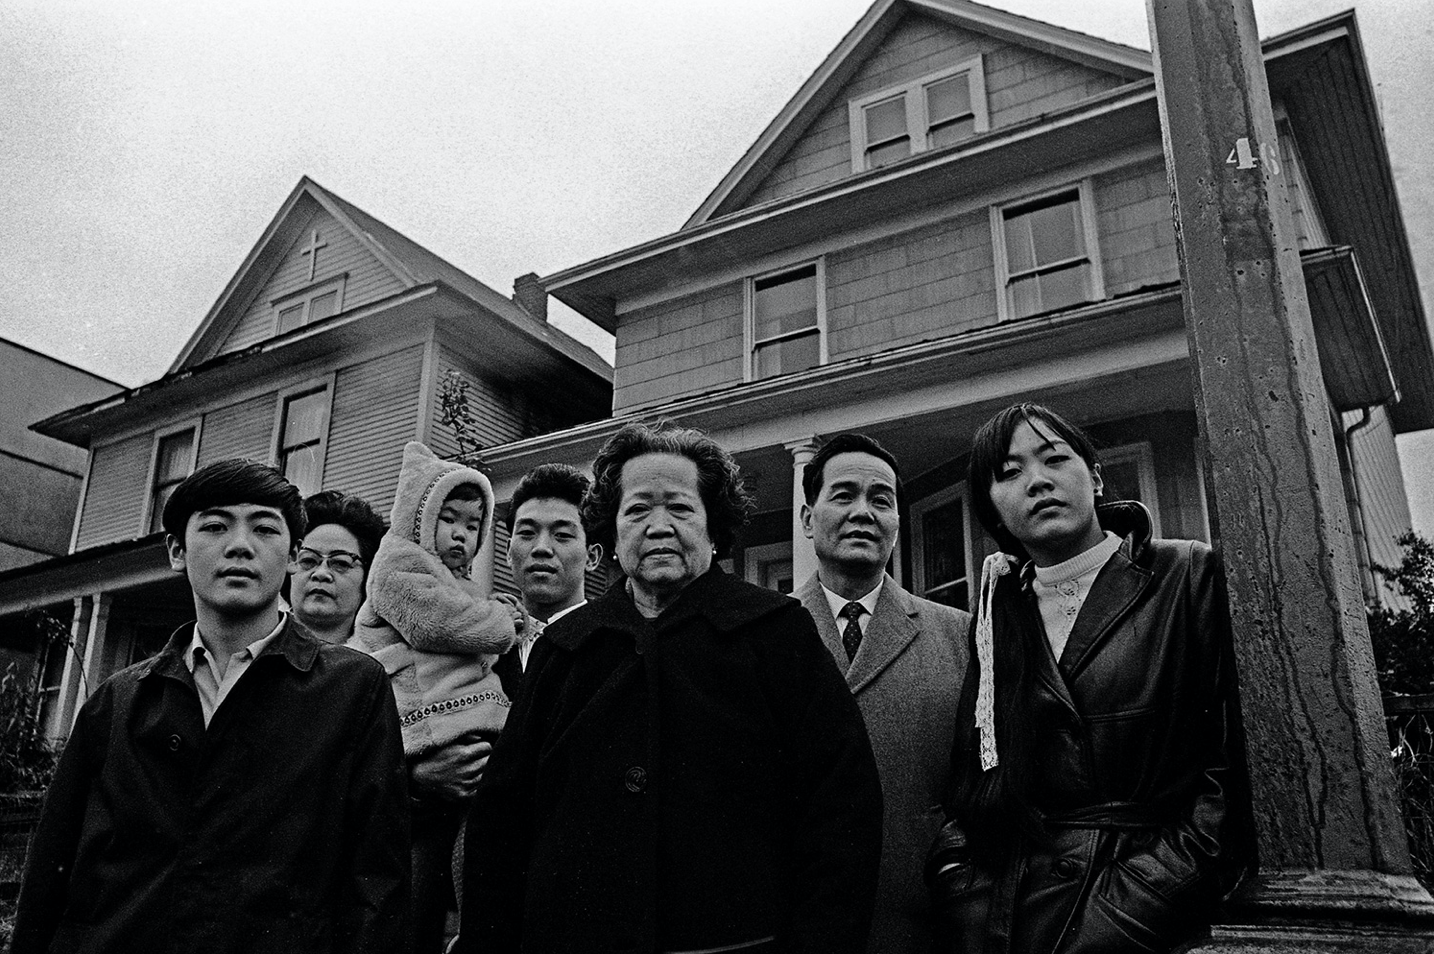 The Chan family in front of 658 Keefer Street, now a historical monument. Mary Lee Chan is second from the left.